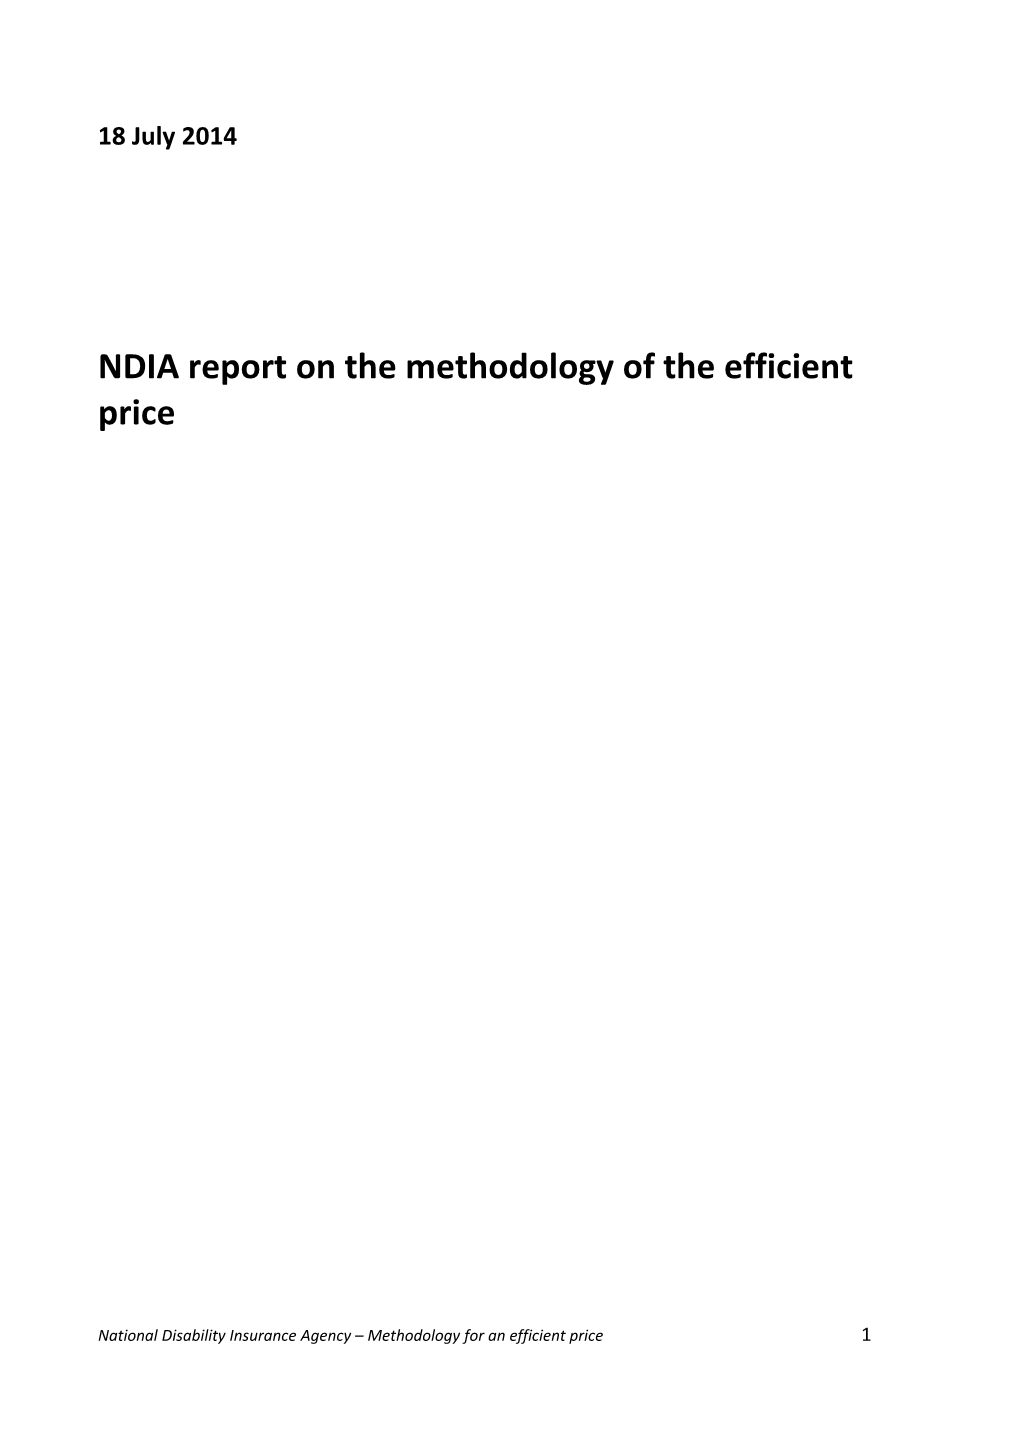 NDIA Report on the Methodology of the Efficient Price